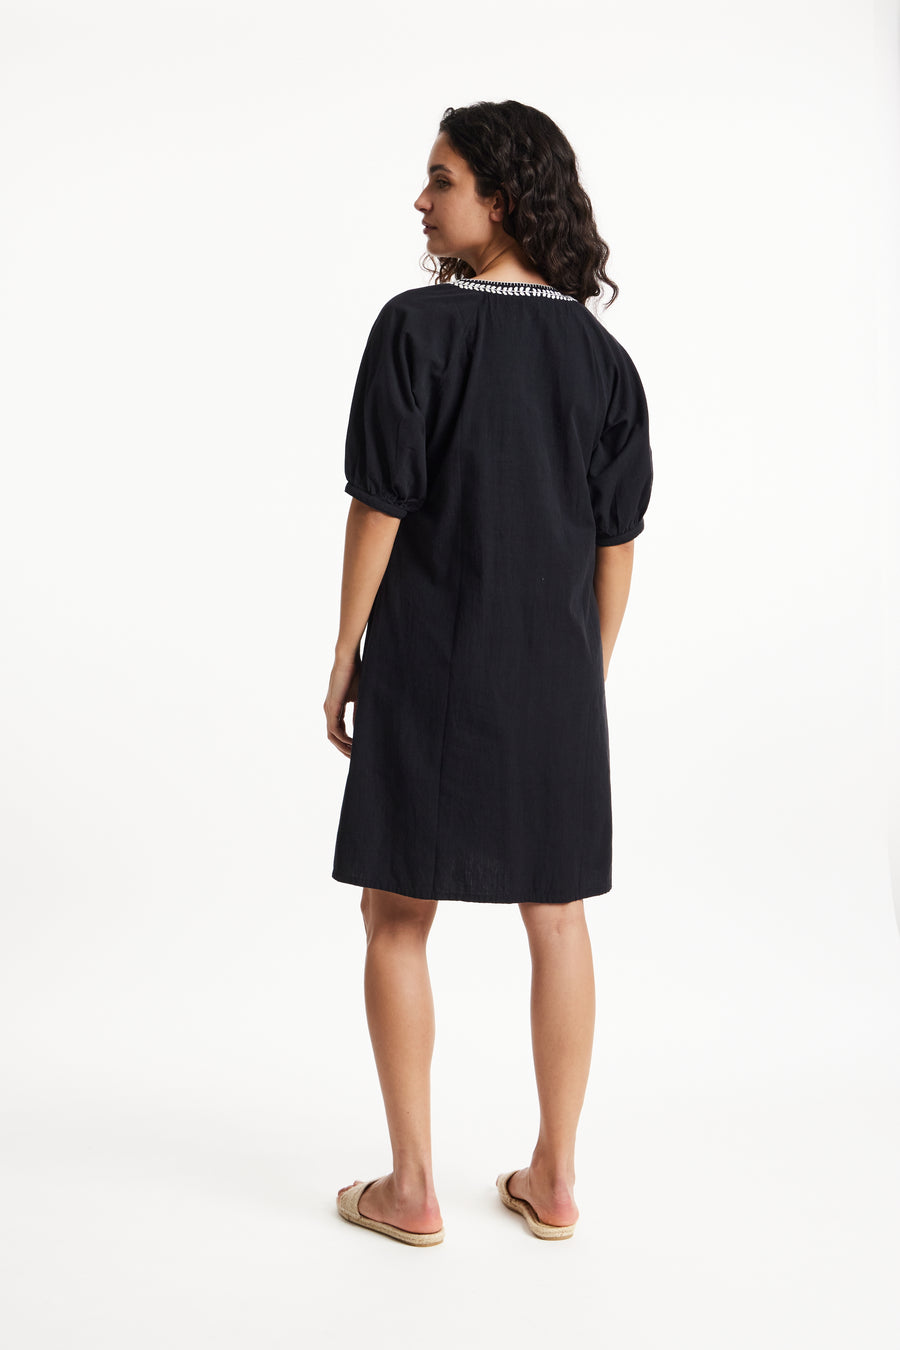 People Tree Fair Trade, Ethical & Sustainable Pia Embroidered Dress in Black 100% Organic Cotton